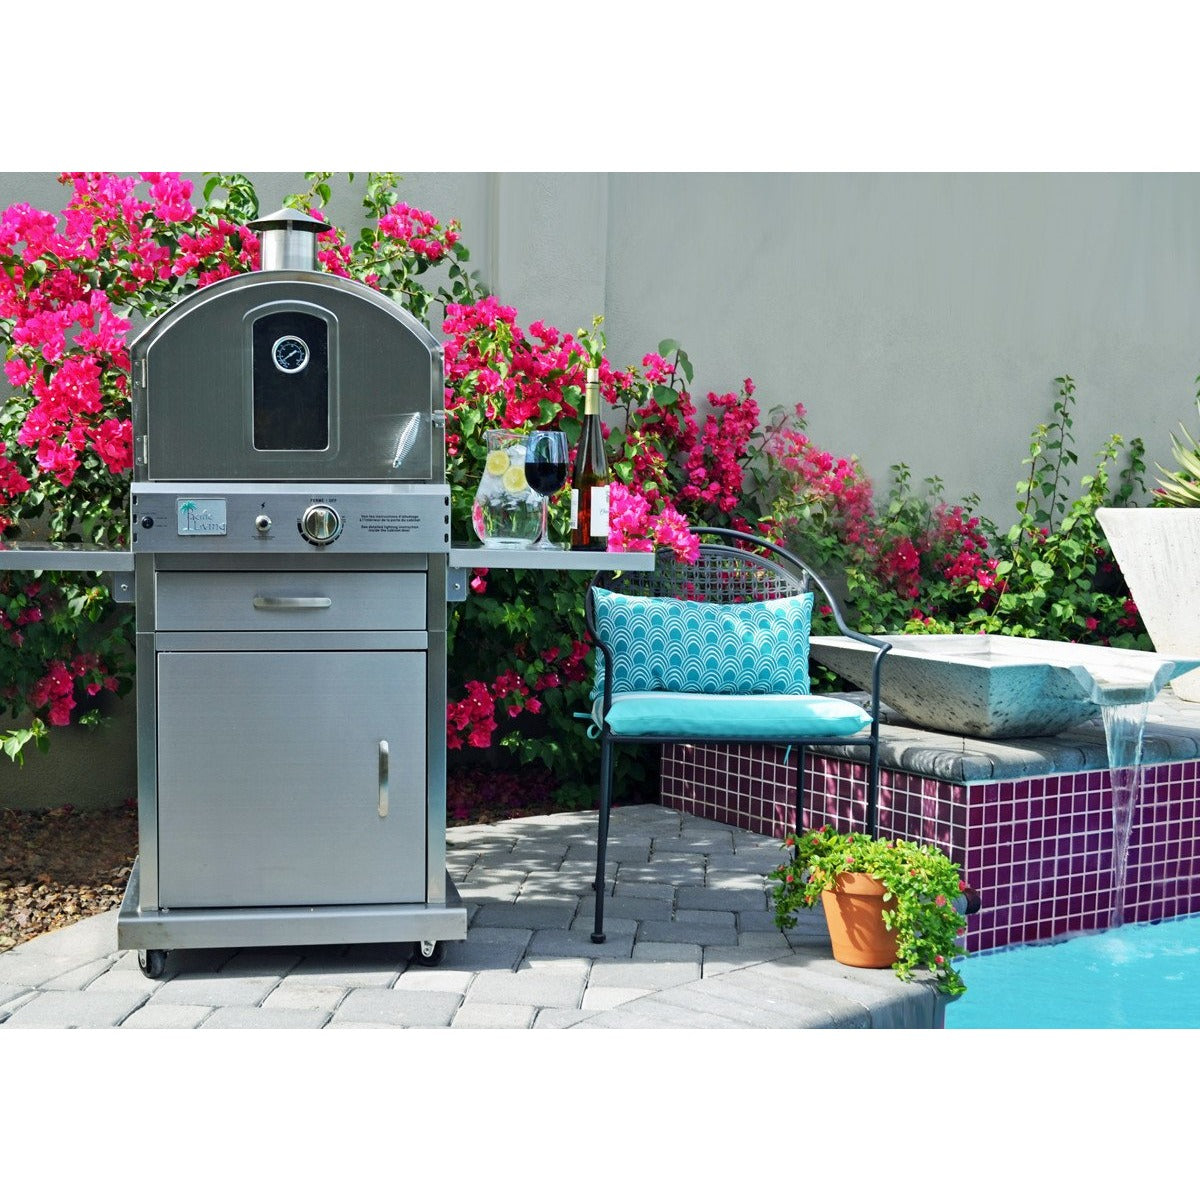 Pacific Living Outdoor pizza oven Oven W/cart - M&K Grills